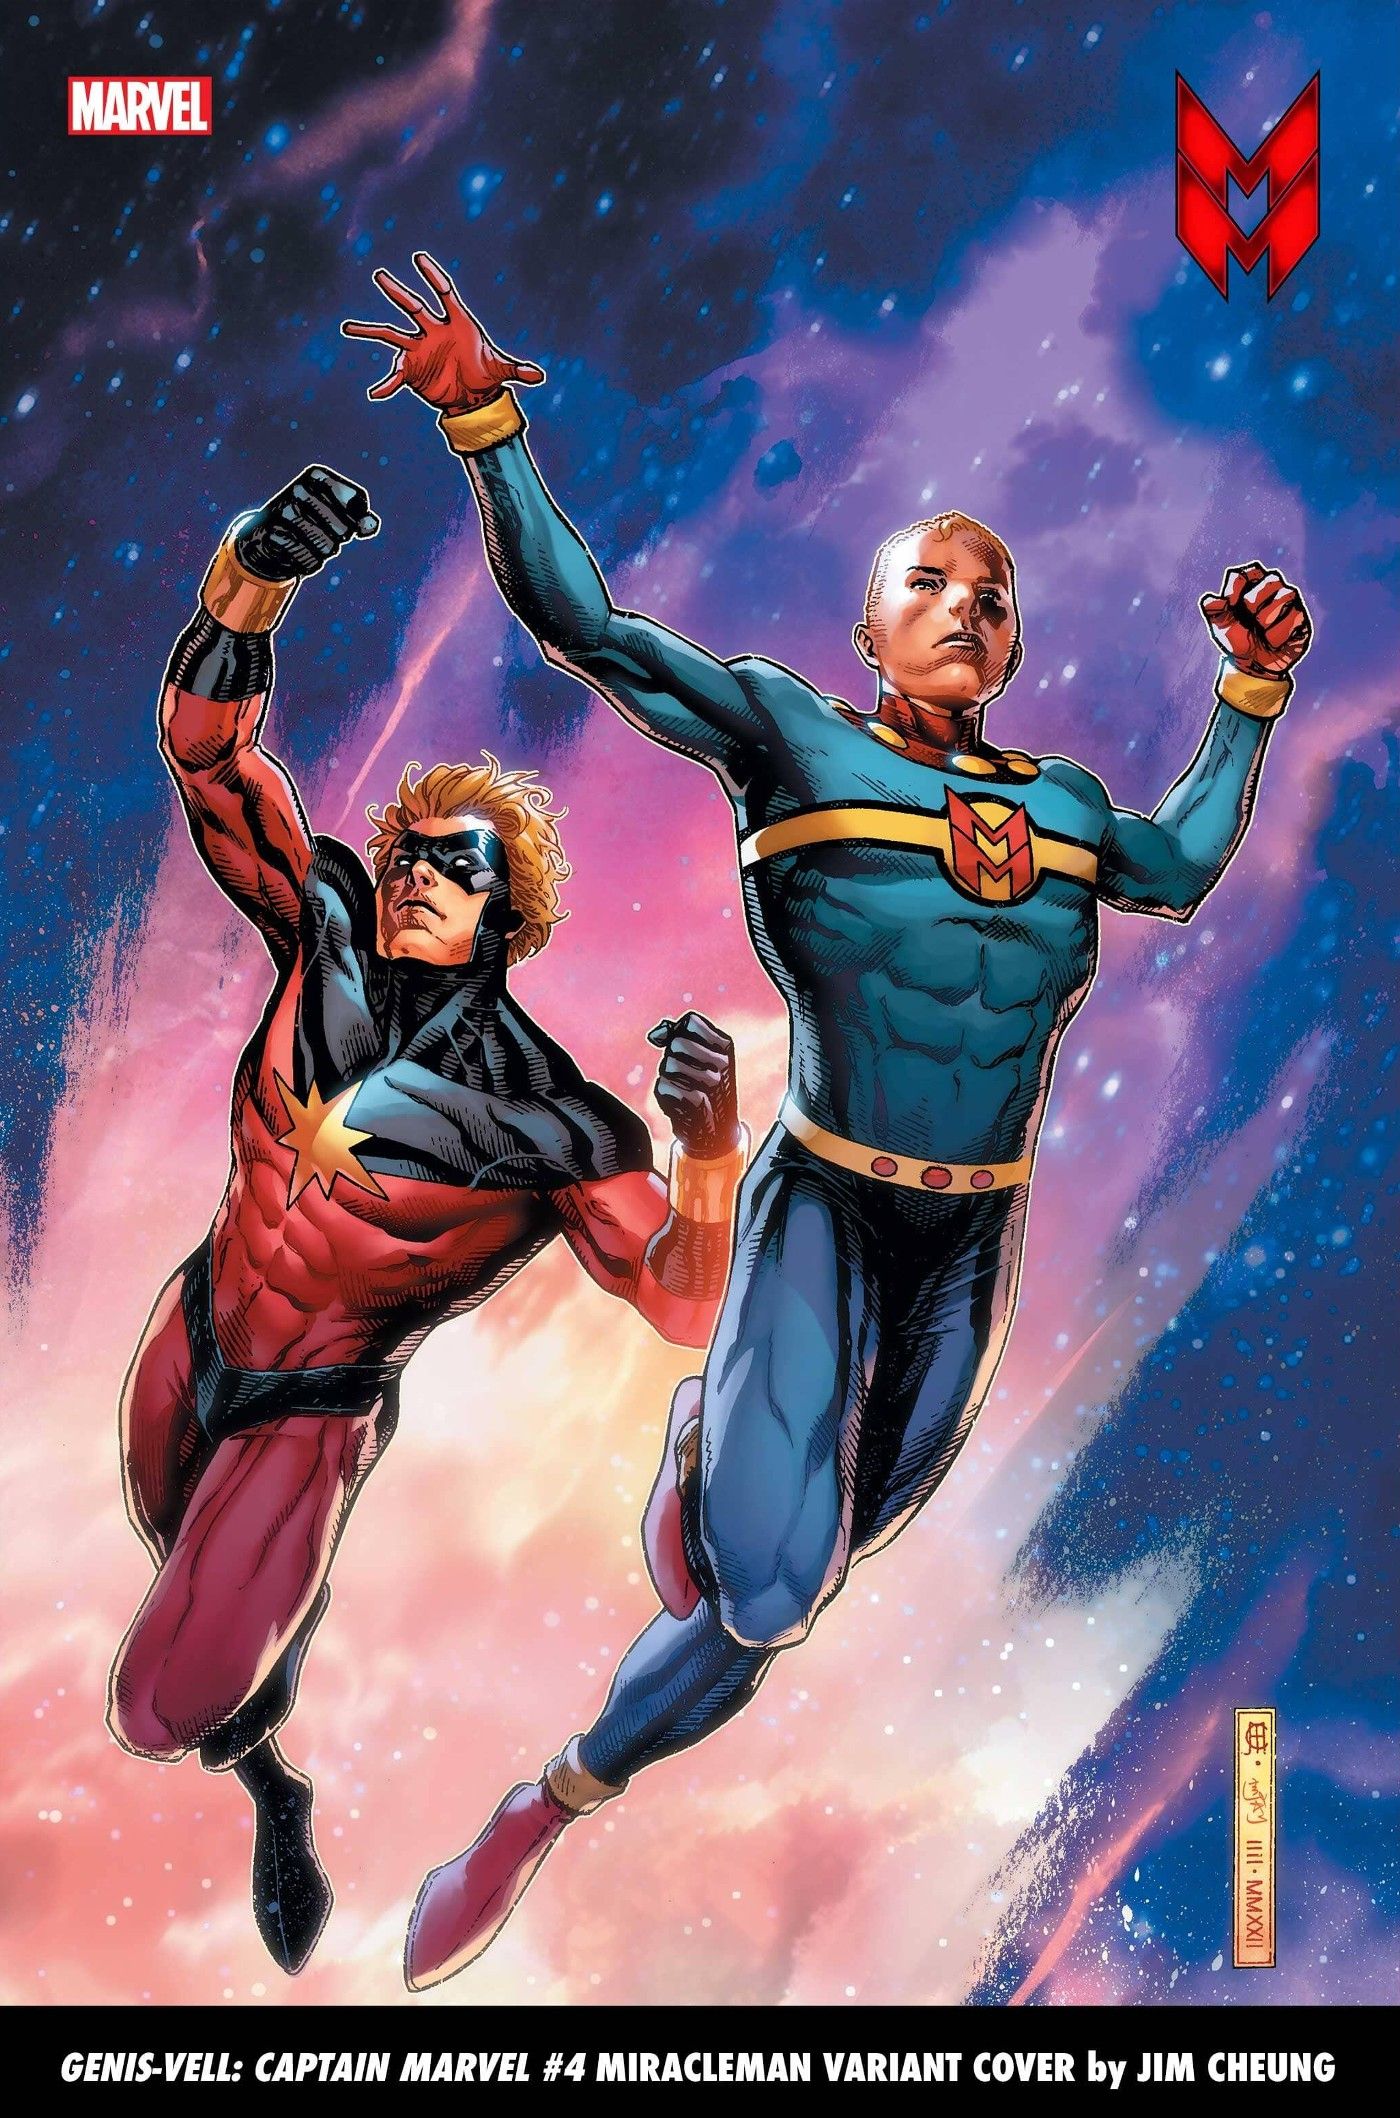 GENIS-VELL CAPTAIN MARVEL 4 MIRACLEMAN VARIANT COVER by JIM CHEUNG